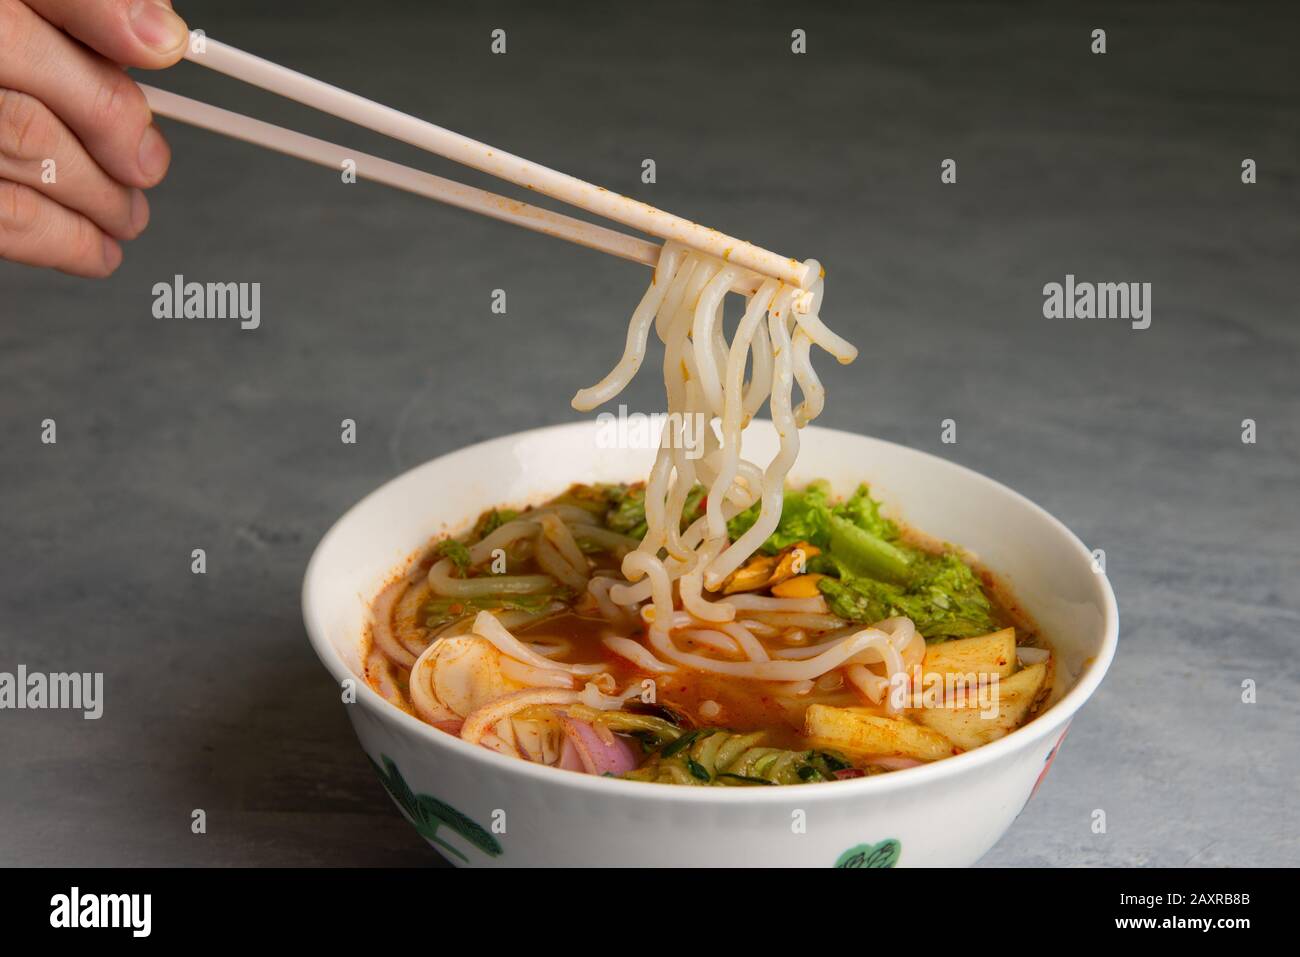 hand with chopstick and laksa curry noodles Stock Photo